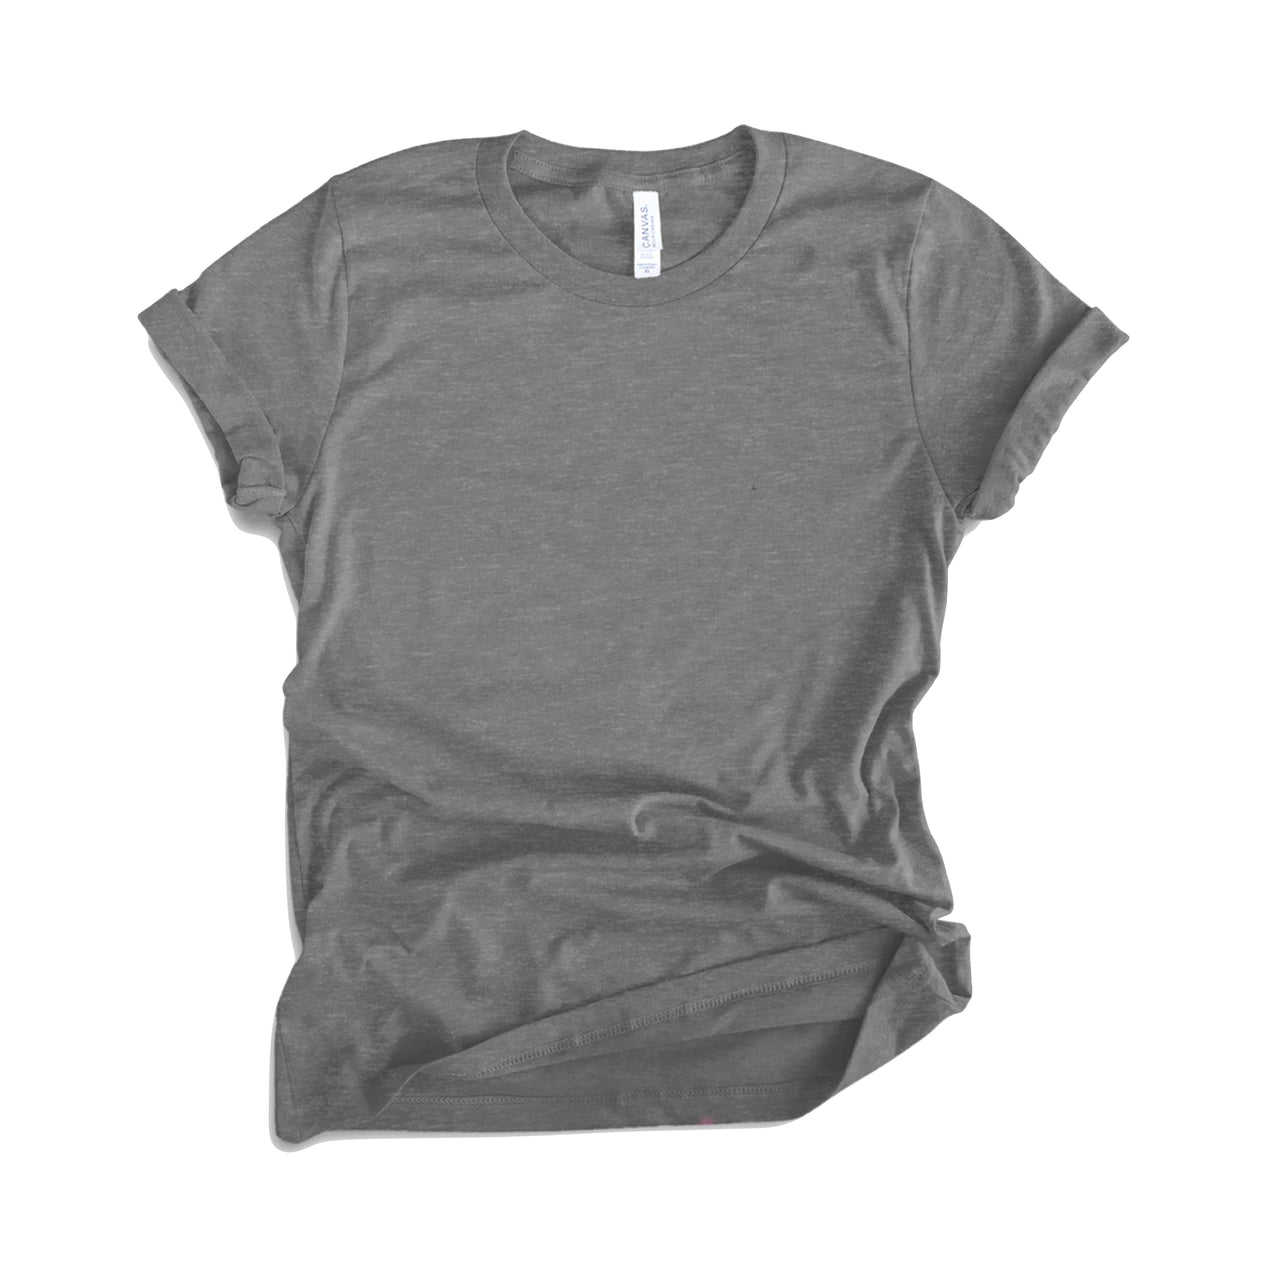 Adult - Bella Unisex Cotton/Poly Tee - (Design of the Week)